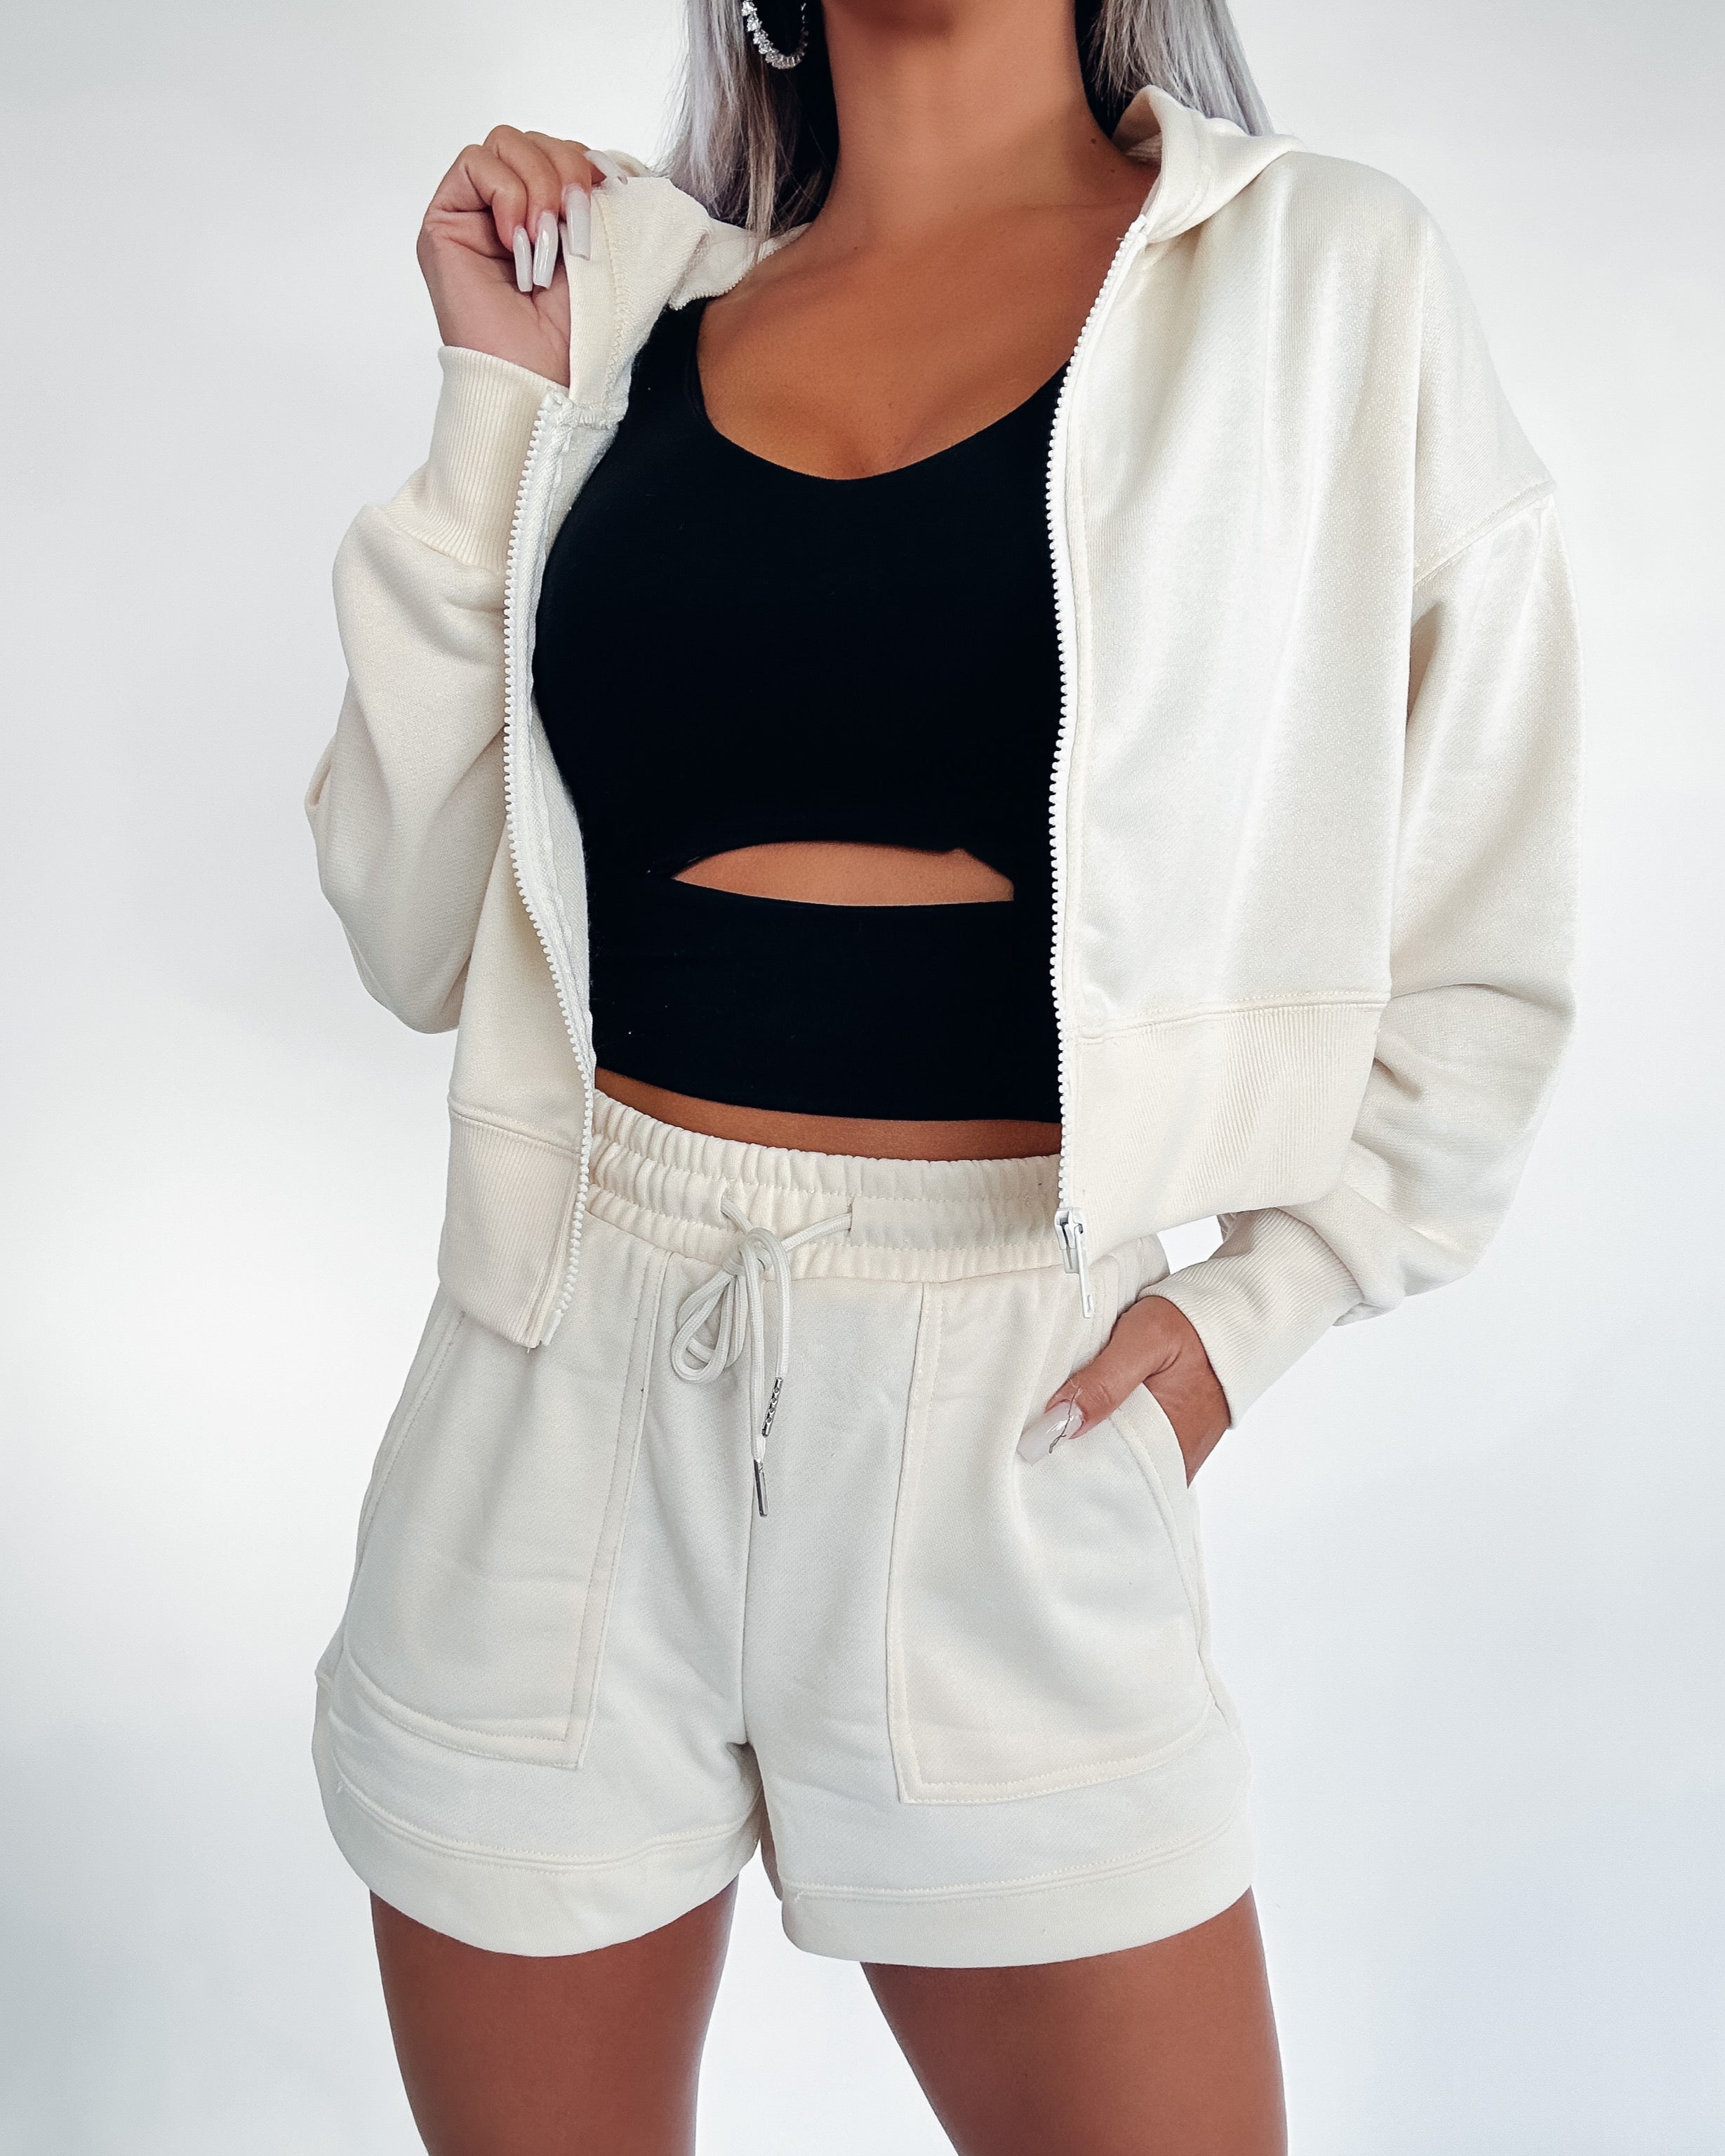 Take It Easy Hooded Zip Up/Shorts Set- Antique White